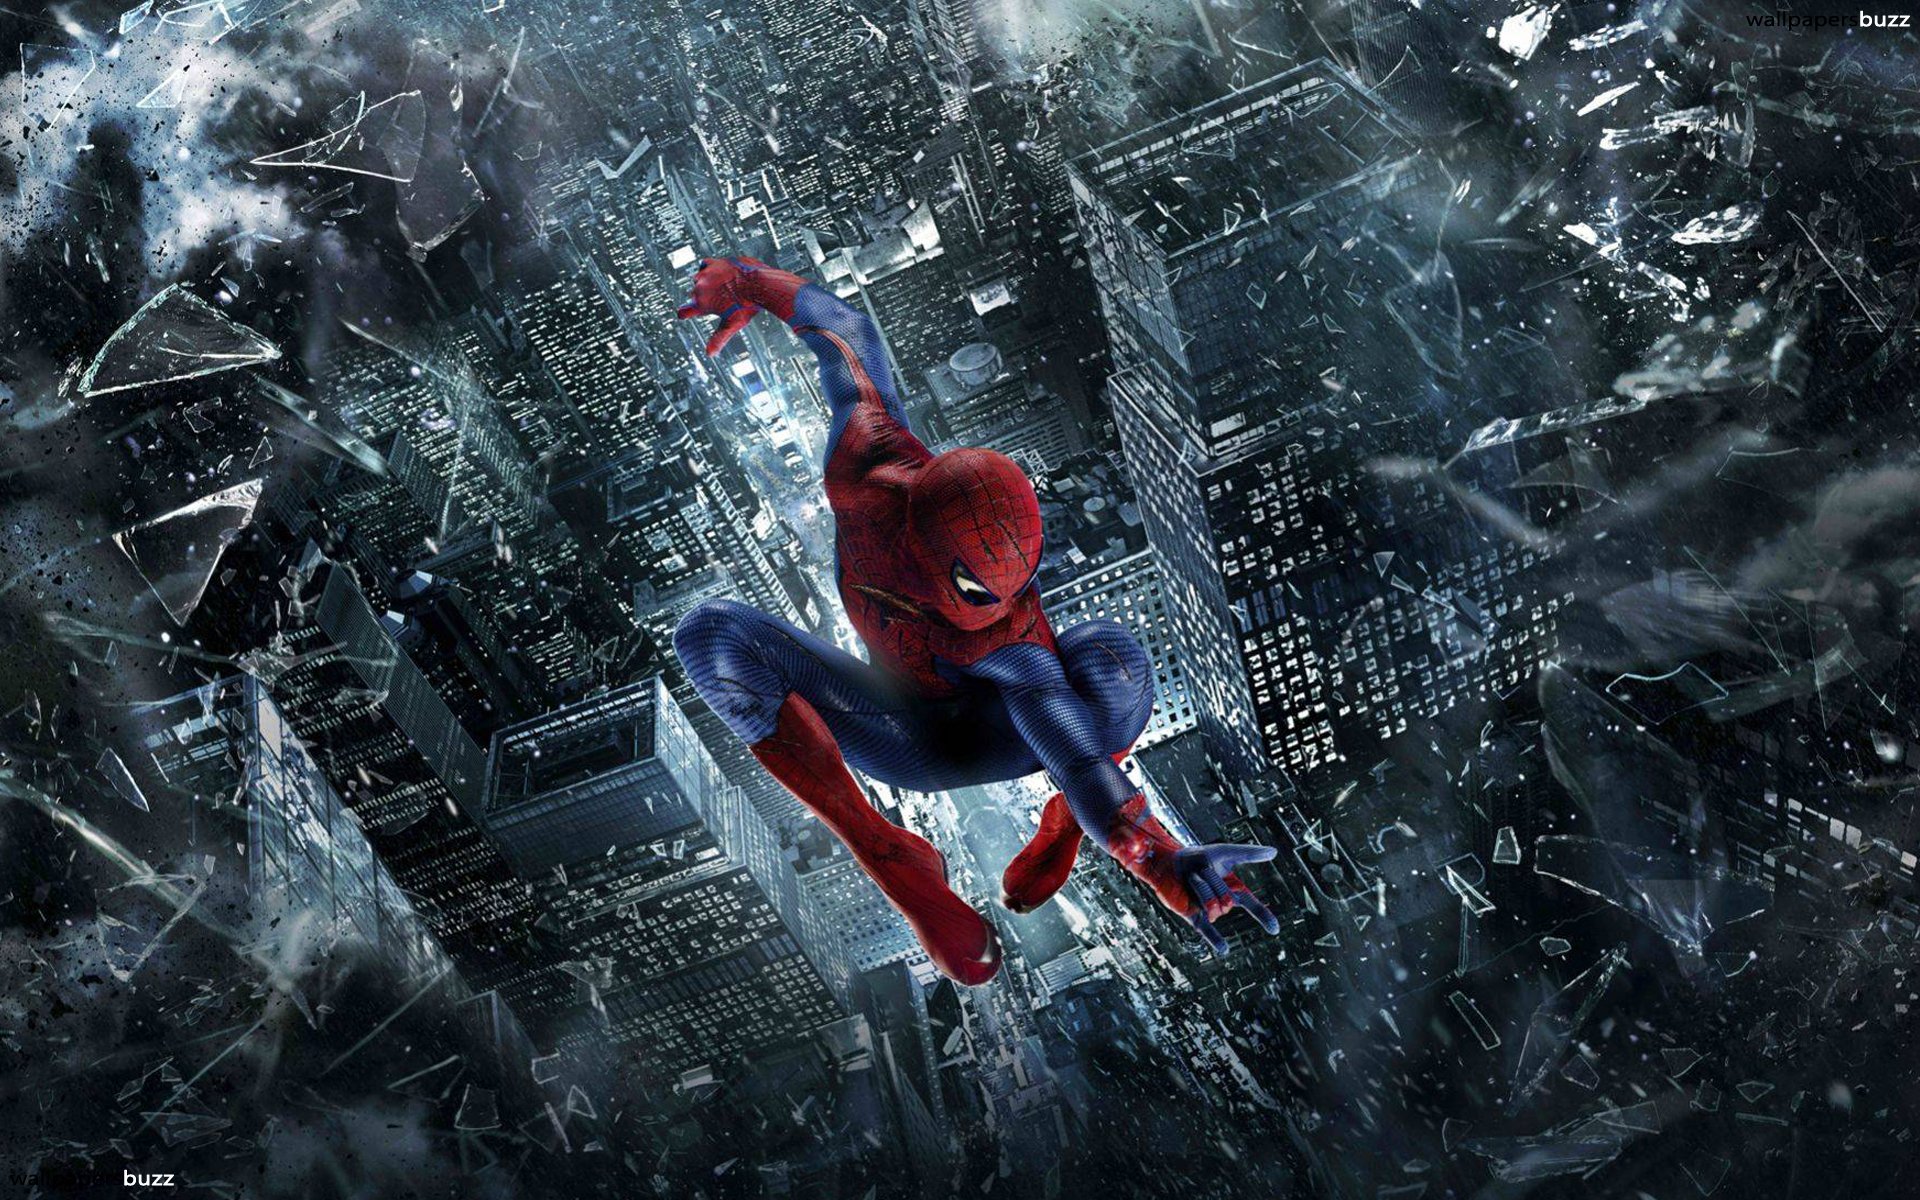 High Quality Spiderman 4 HD Wallpapers1 - HD Wallpapers N